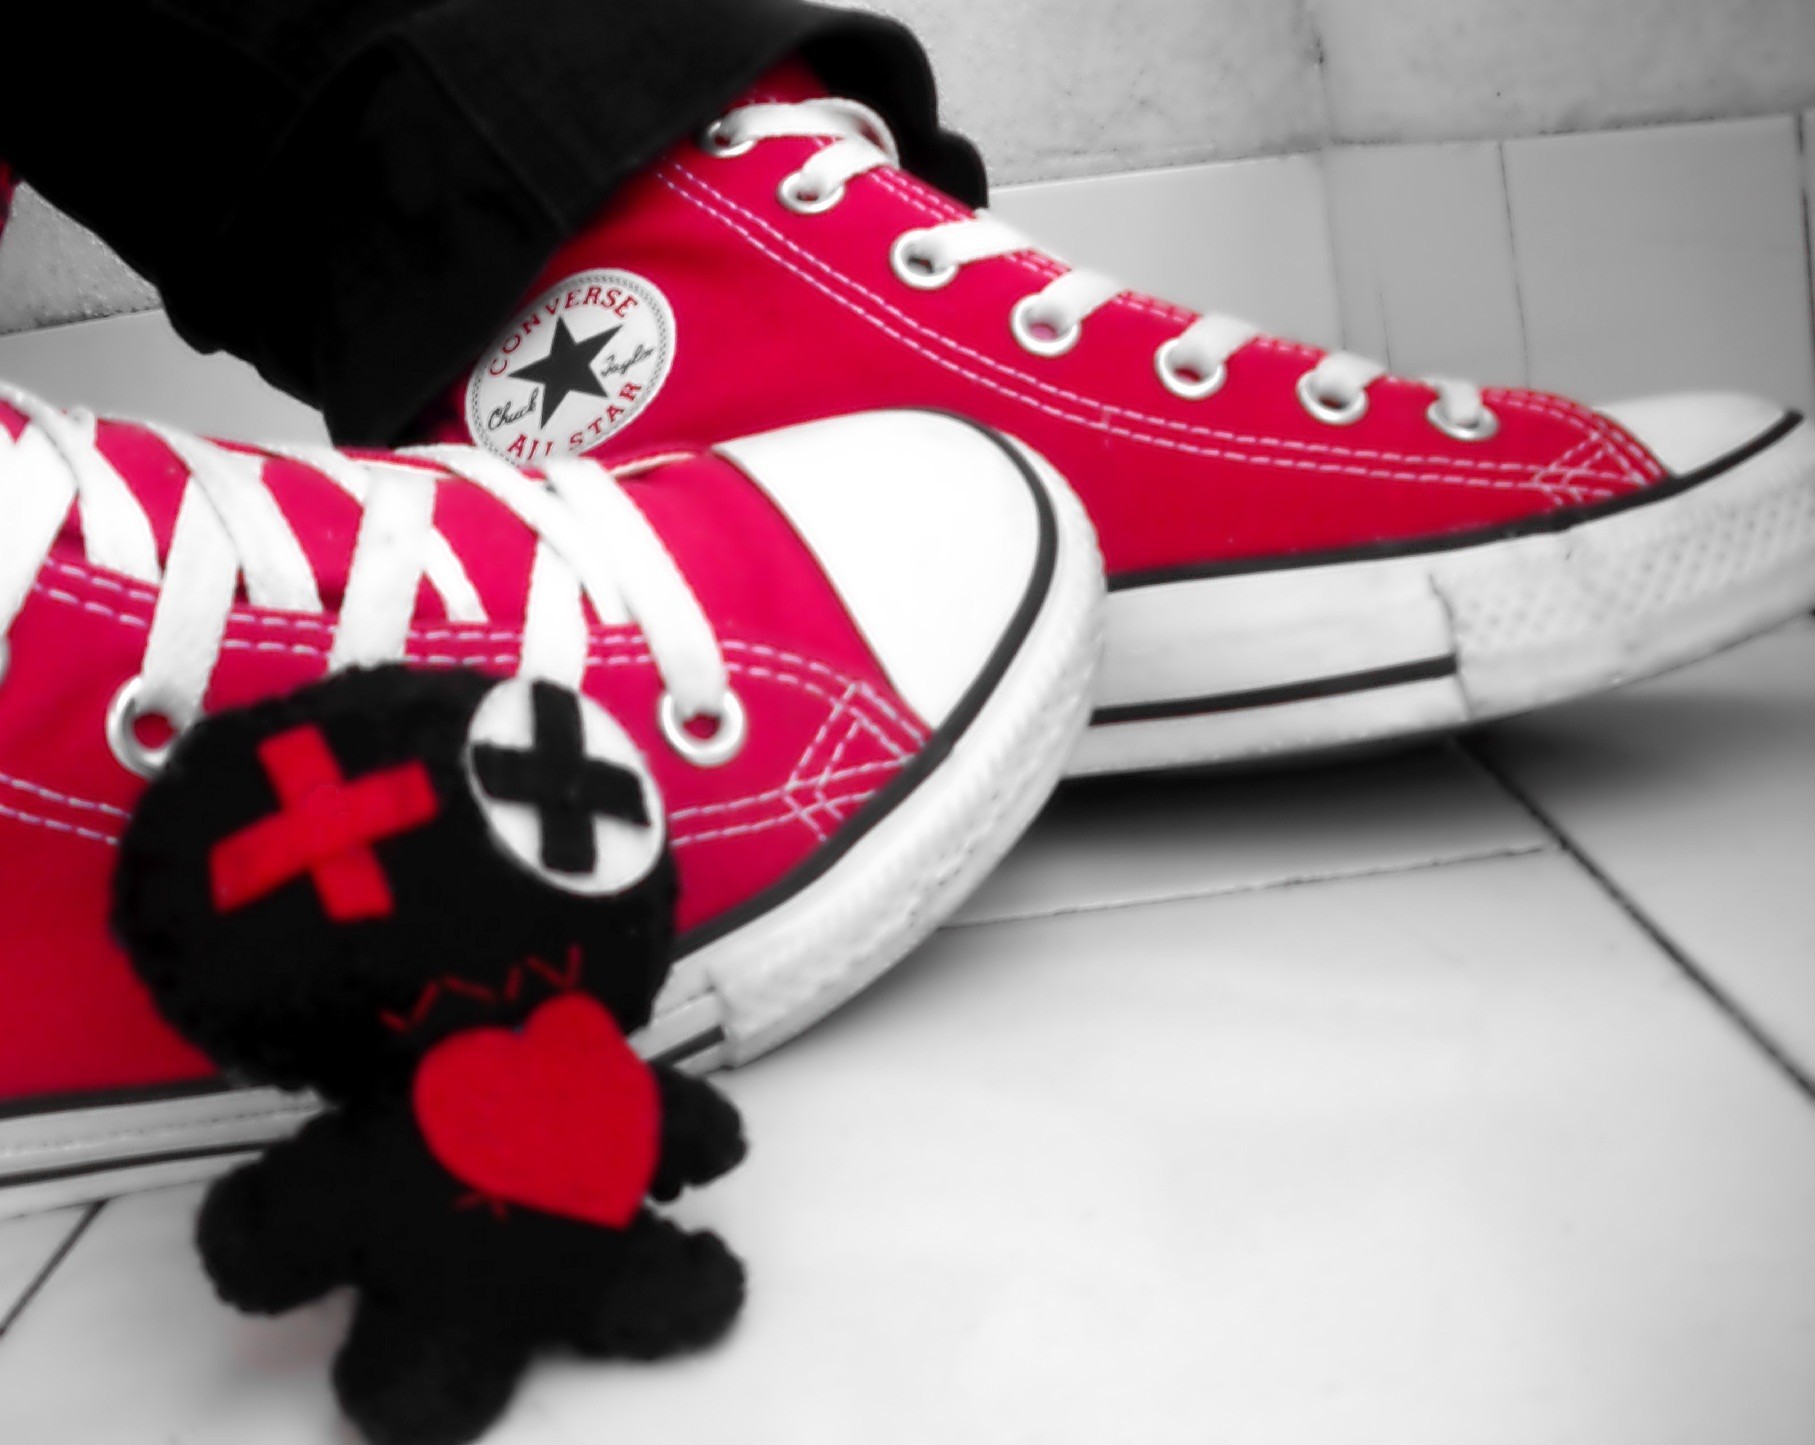 General 1815x1445 shoes black red white feet heart Converse chucks red shoes